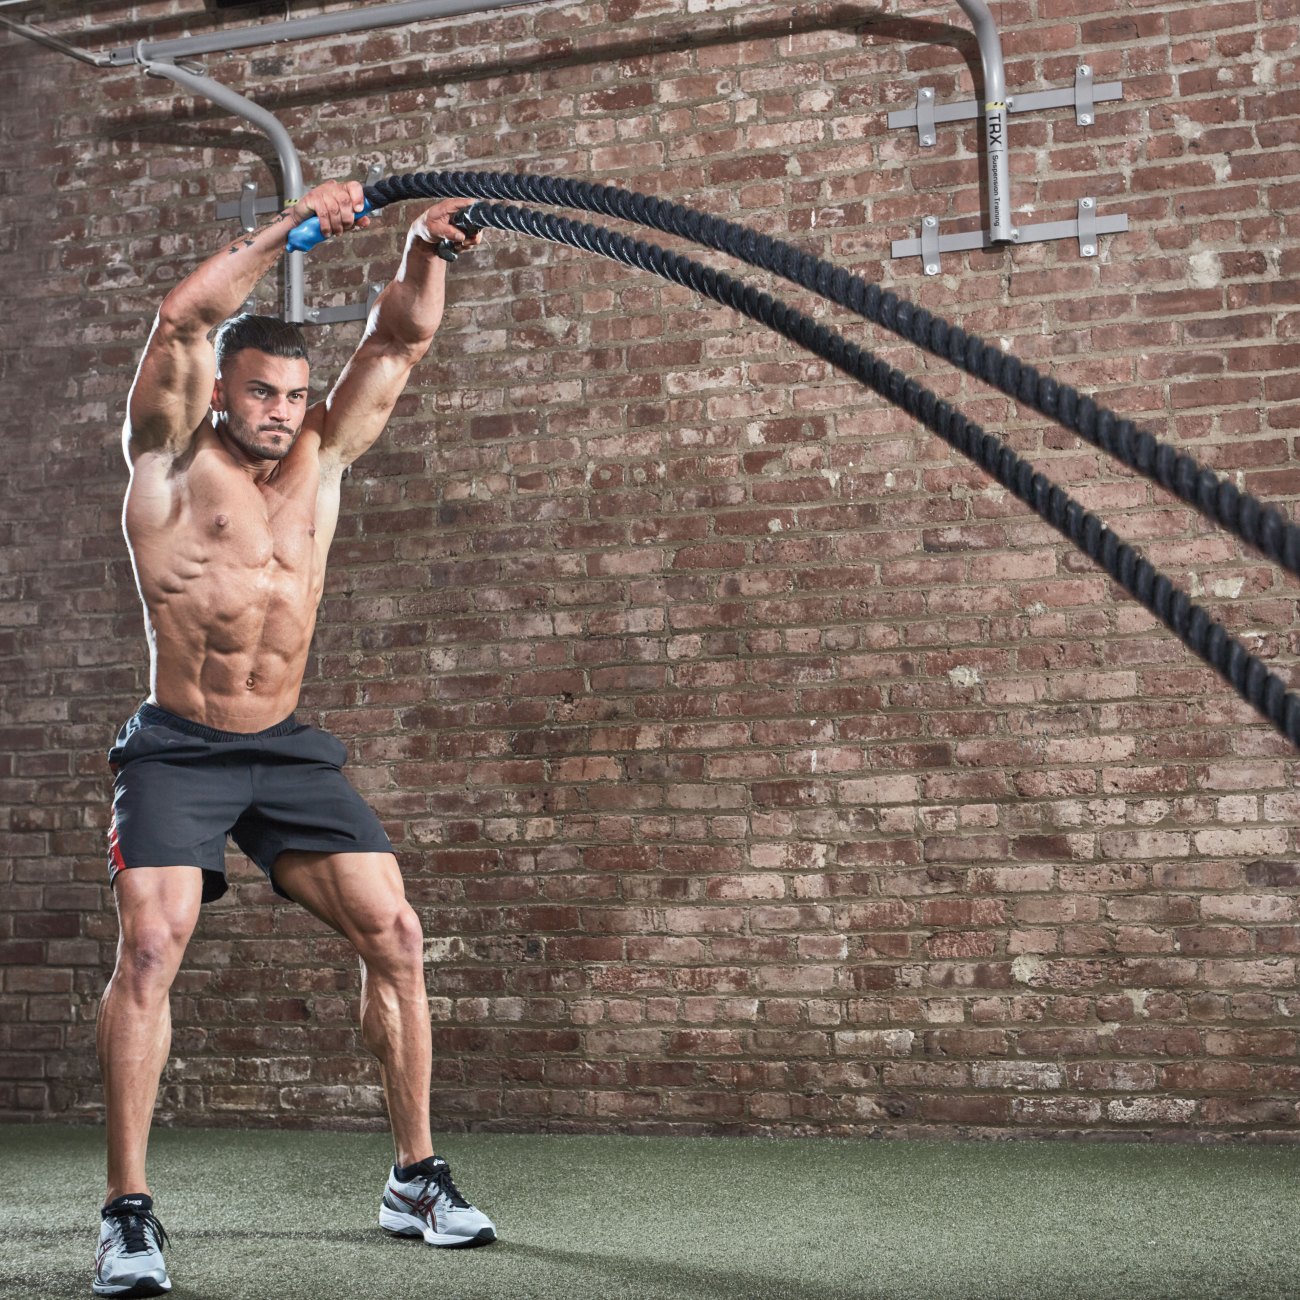 rope-slam-exercise-video-guide-muscle-fitness